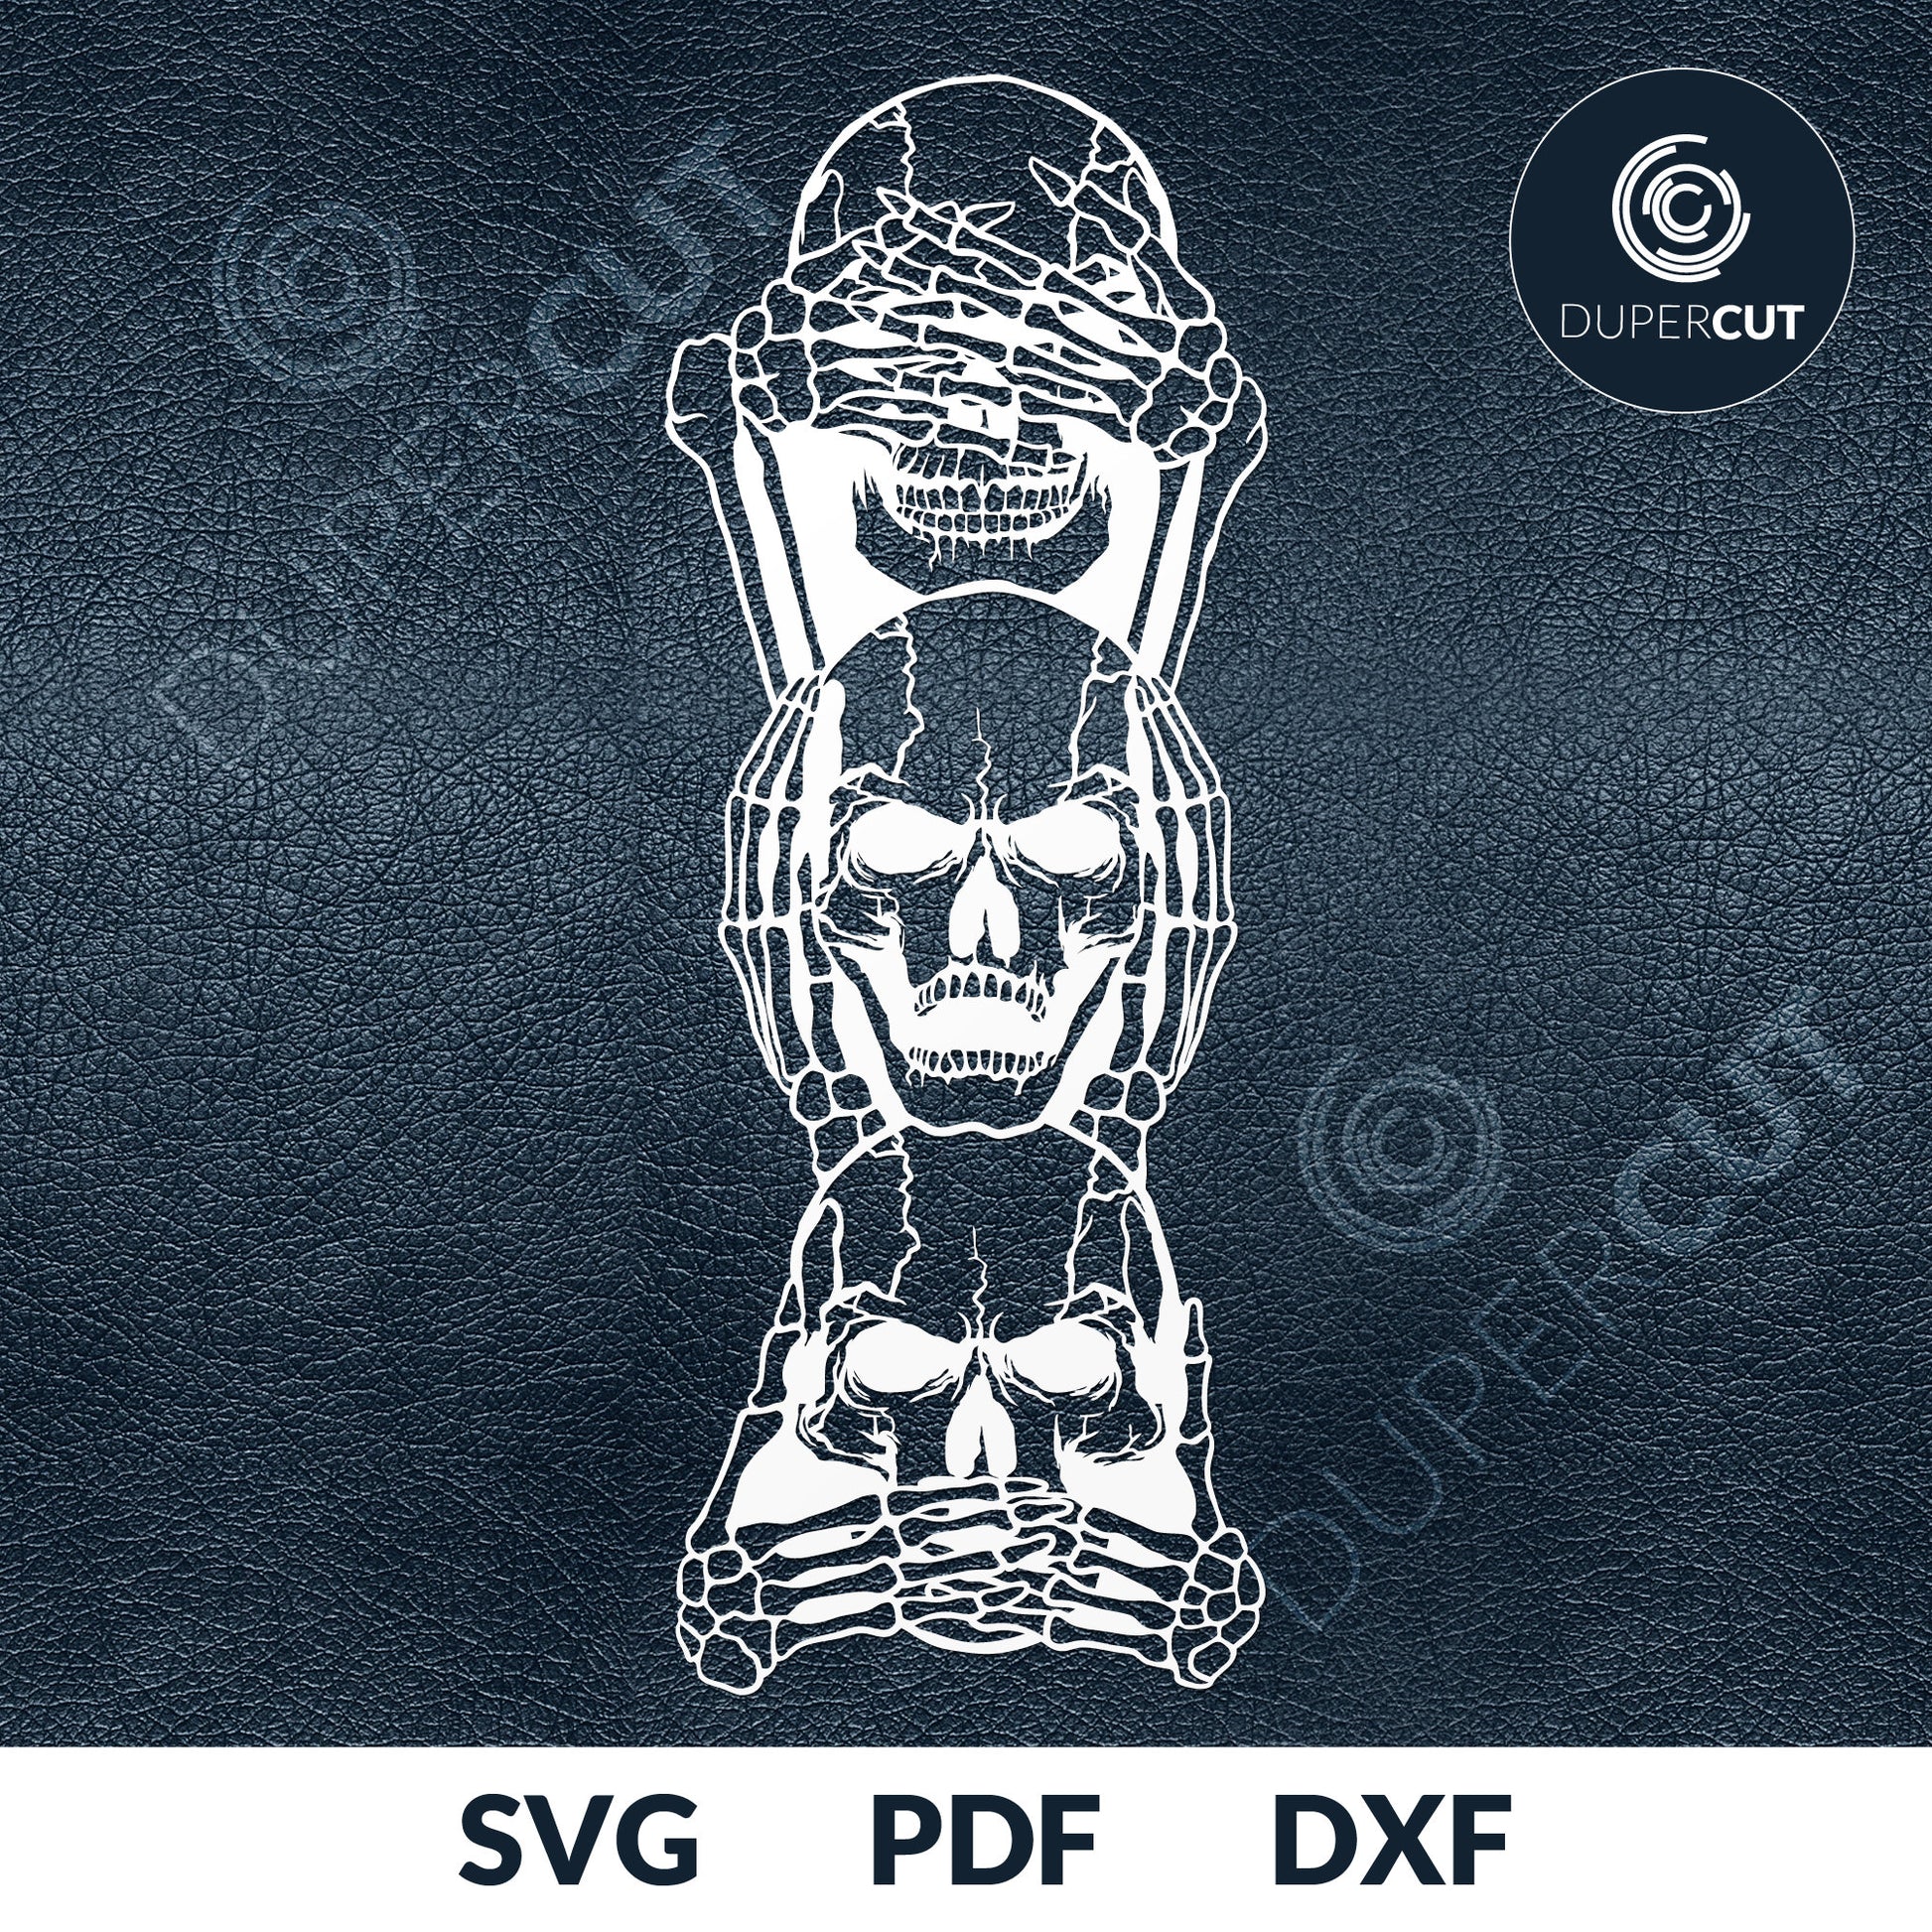 Thre wise skulls no evil. SVG JPEG DXF files. Template for paper cutting, laser, print on demand. For use with Cricut, Glowforge, Silhouette Cameo, CNC machines. Personal or commercial license.